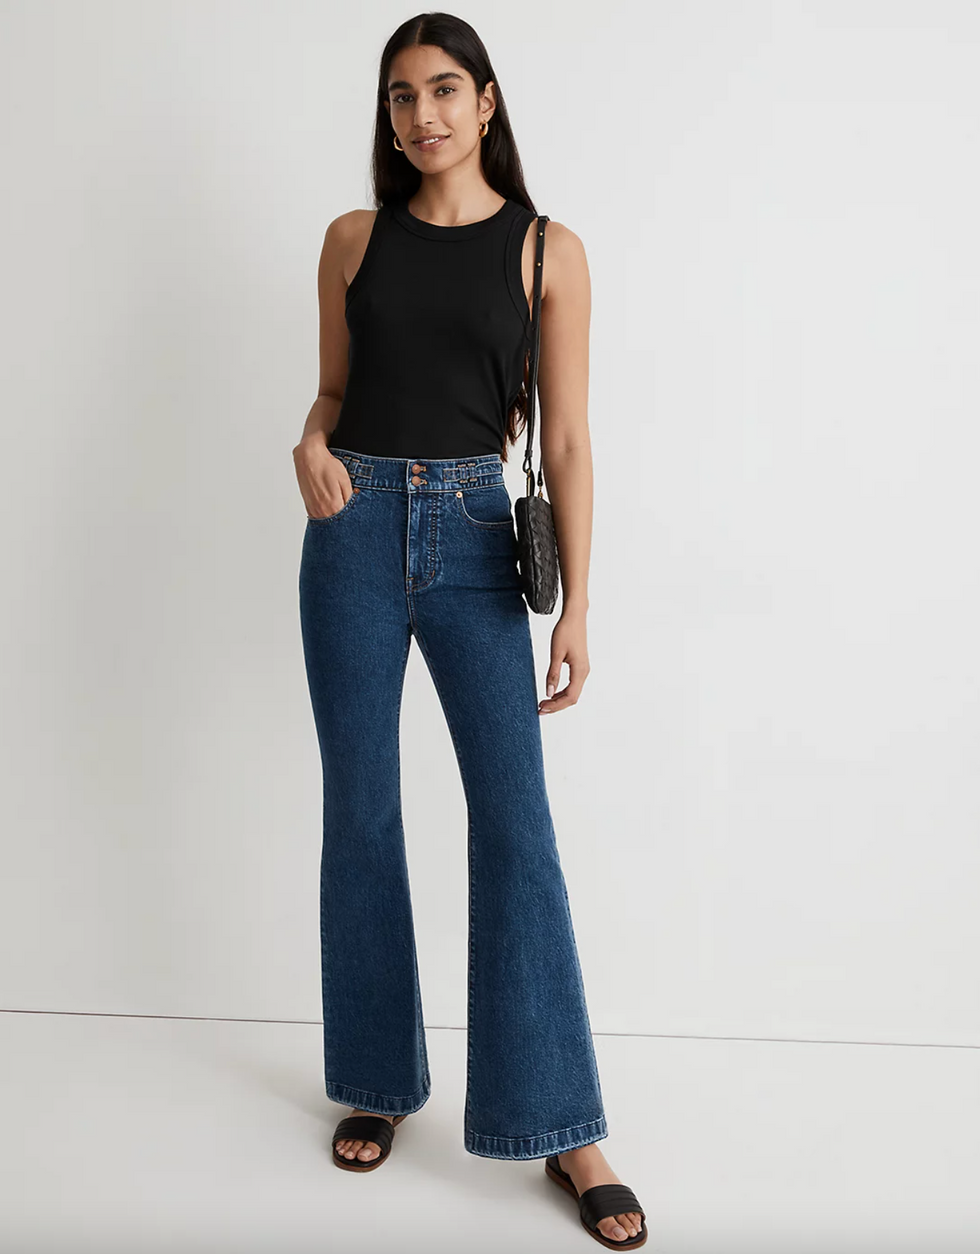 Madewell's Spring '23 Collection: Must-Haves Unveiled! - Brit + Co